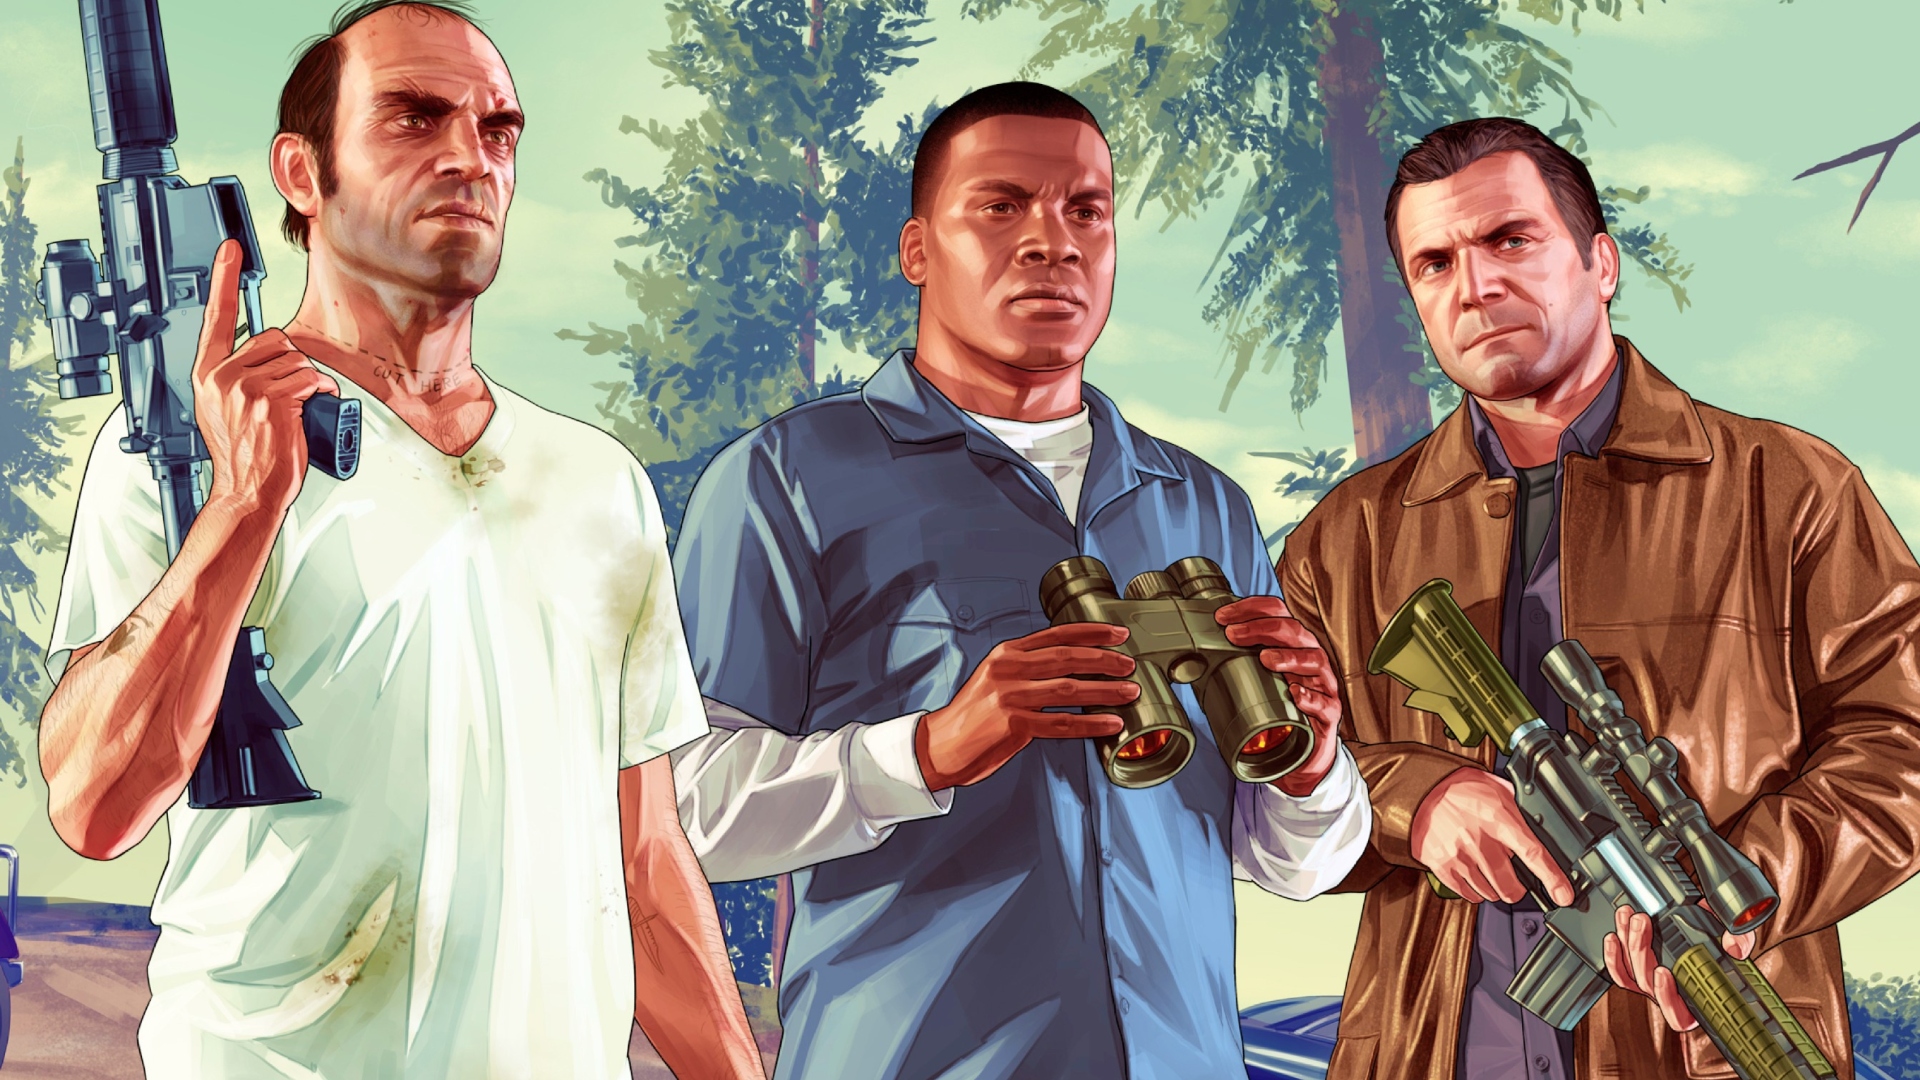 GTA 5 update hides a secret message promising to 